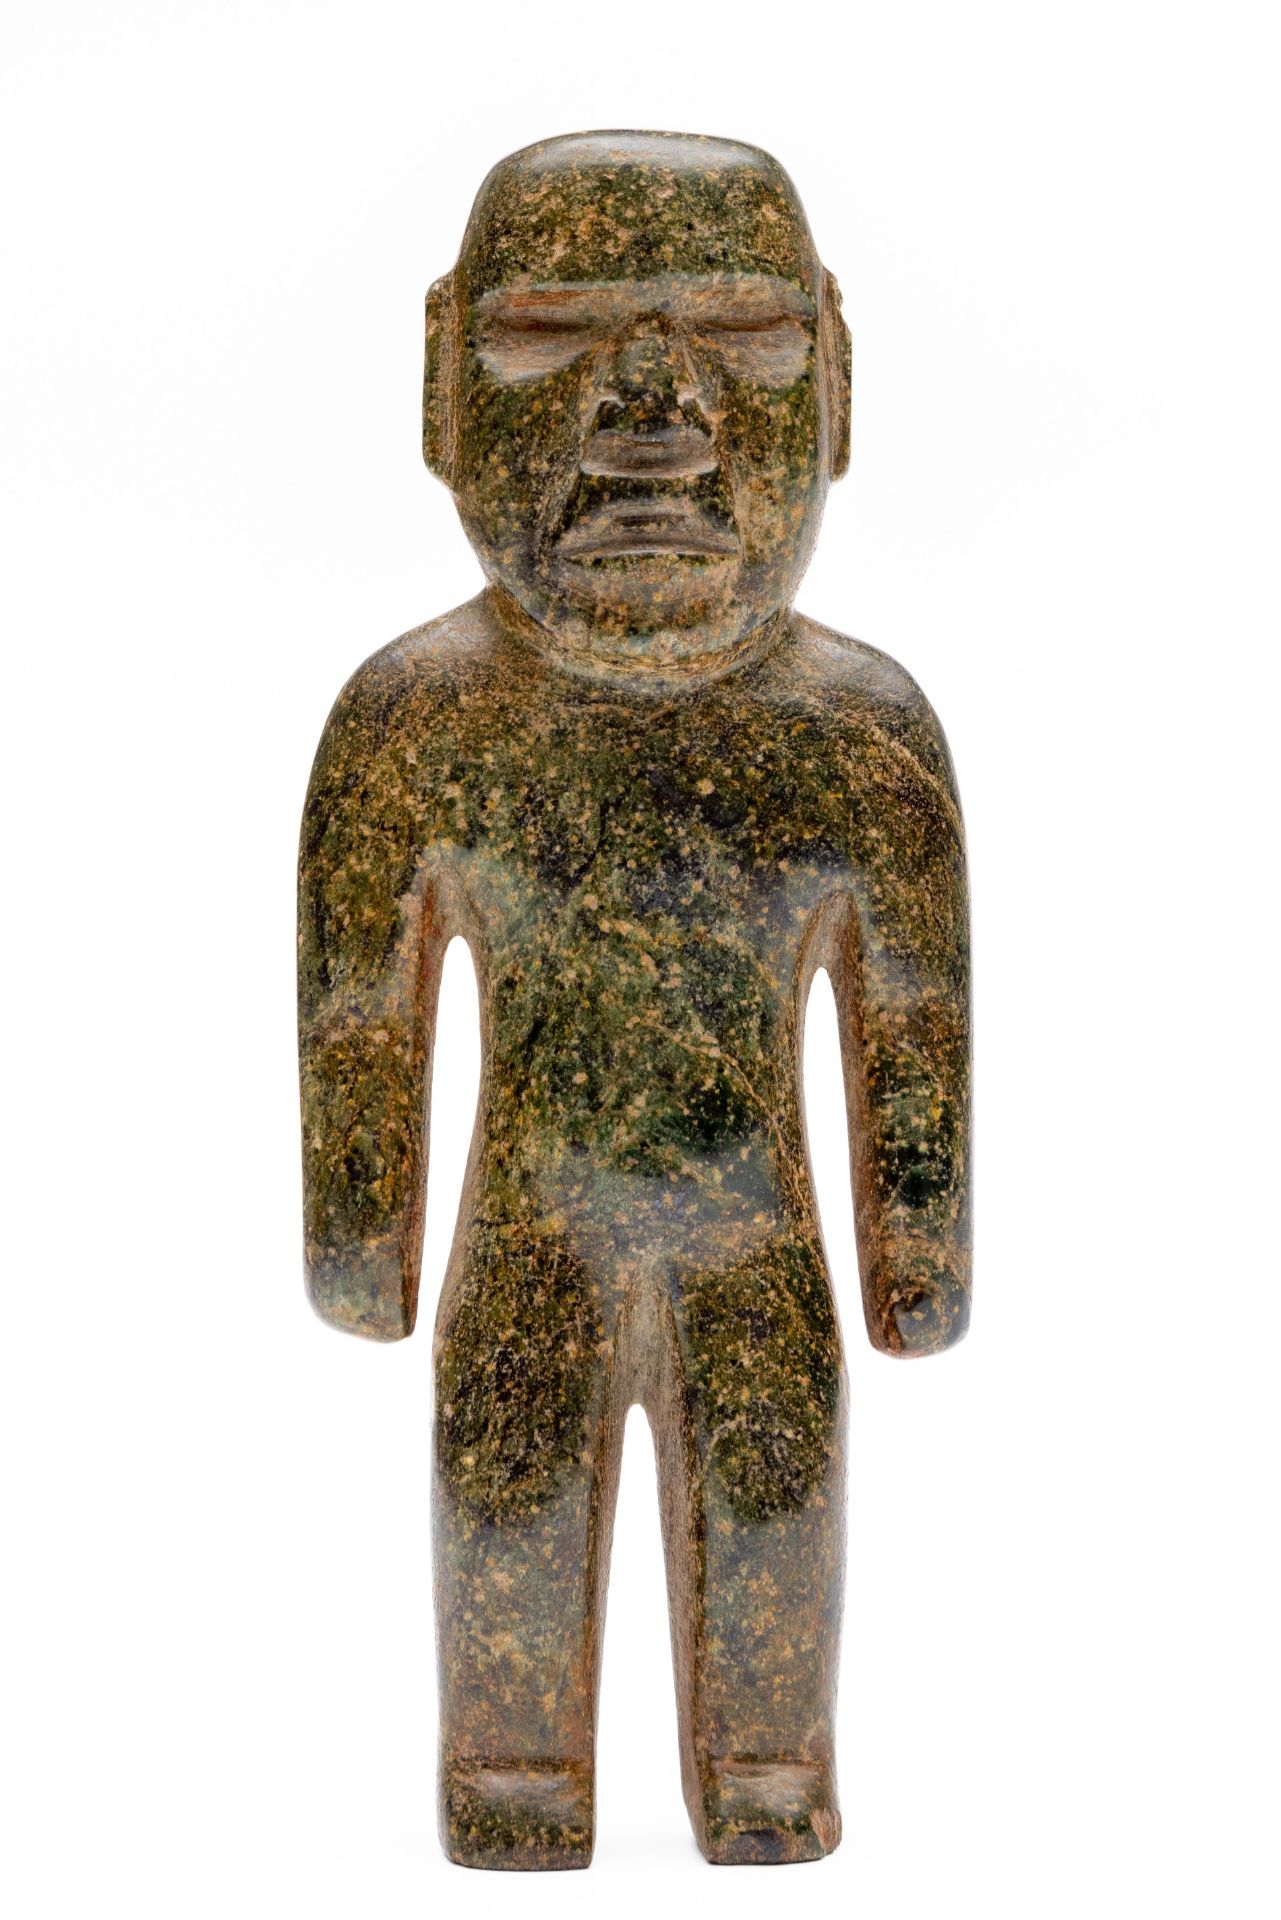 Mexico, Olmec, green stone sculpture of a standing anthropomorphic figure, ca. 900-400 BC. - Image 8 of 9